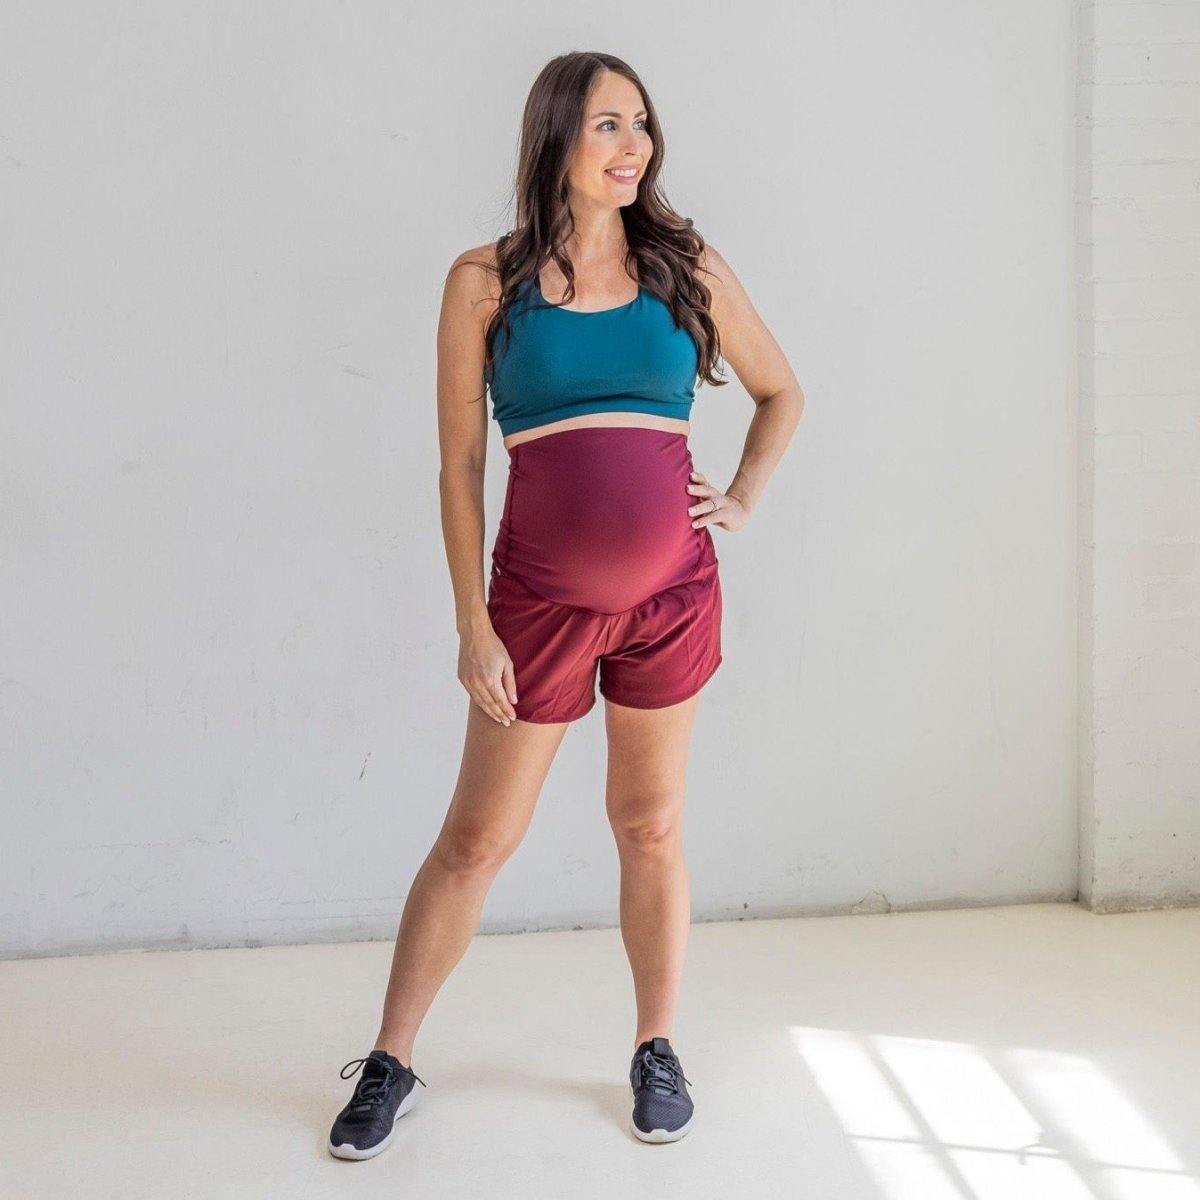 Active Support Maternity Shorts